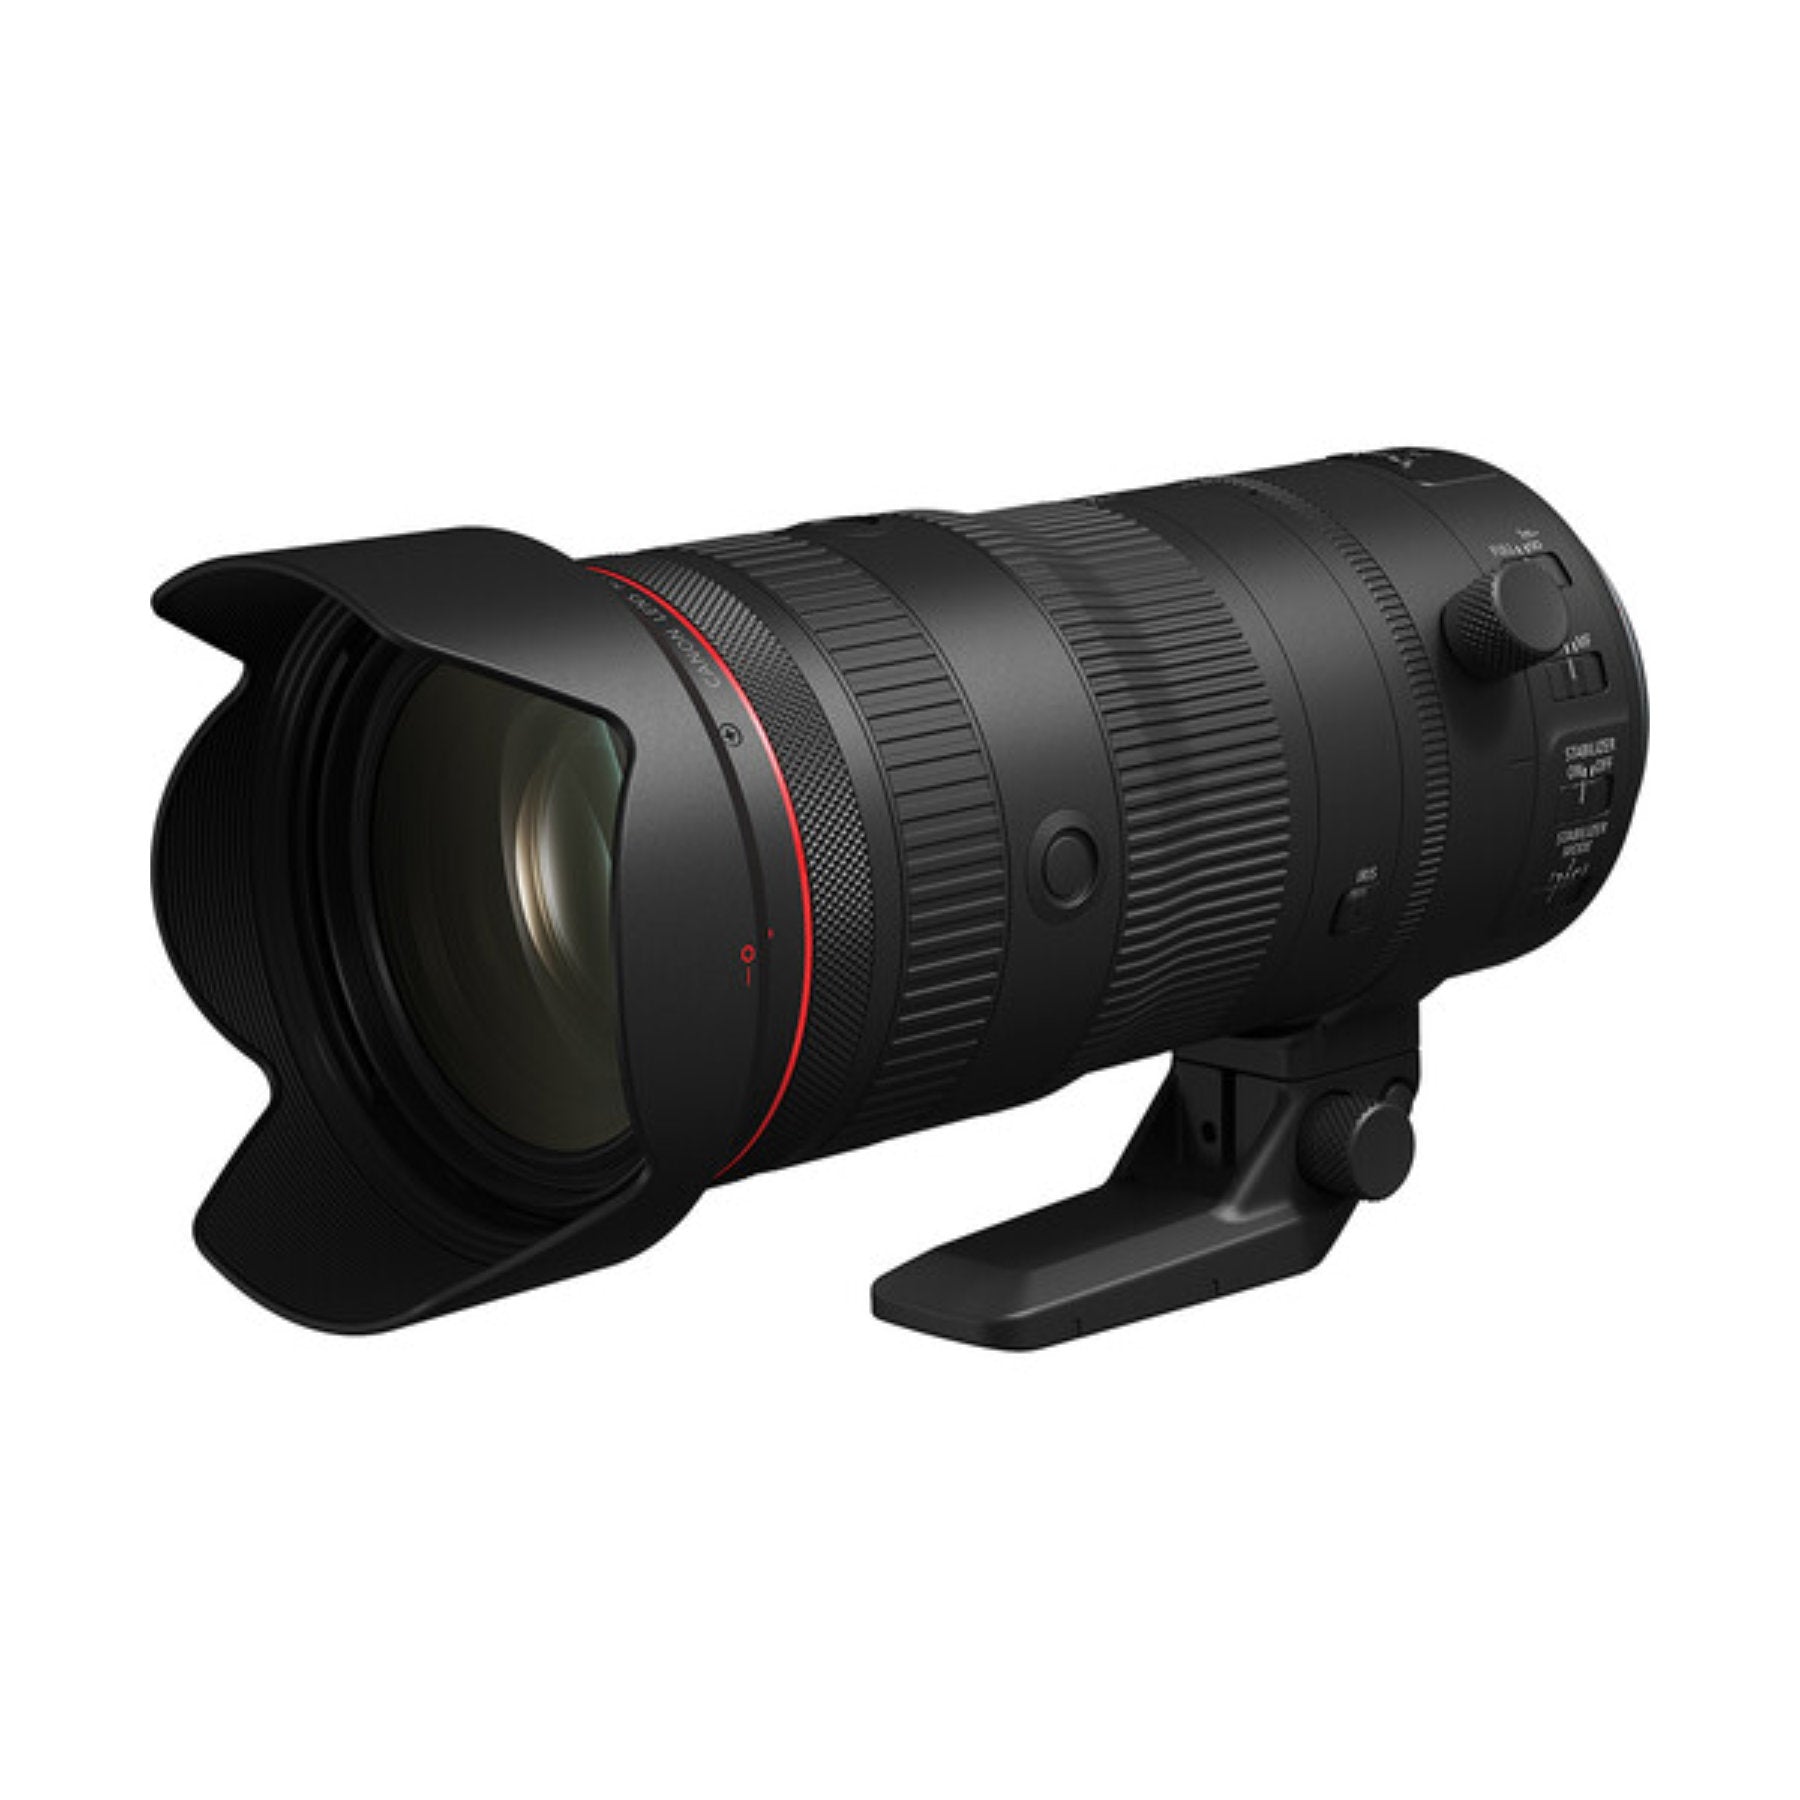 Buy Canon RF 24-105mm f/2.8 L IS USM Z Lens at Topic Store